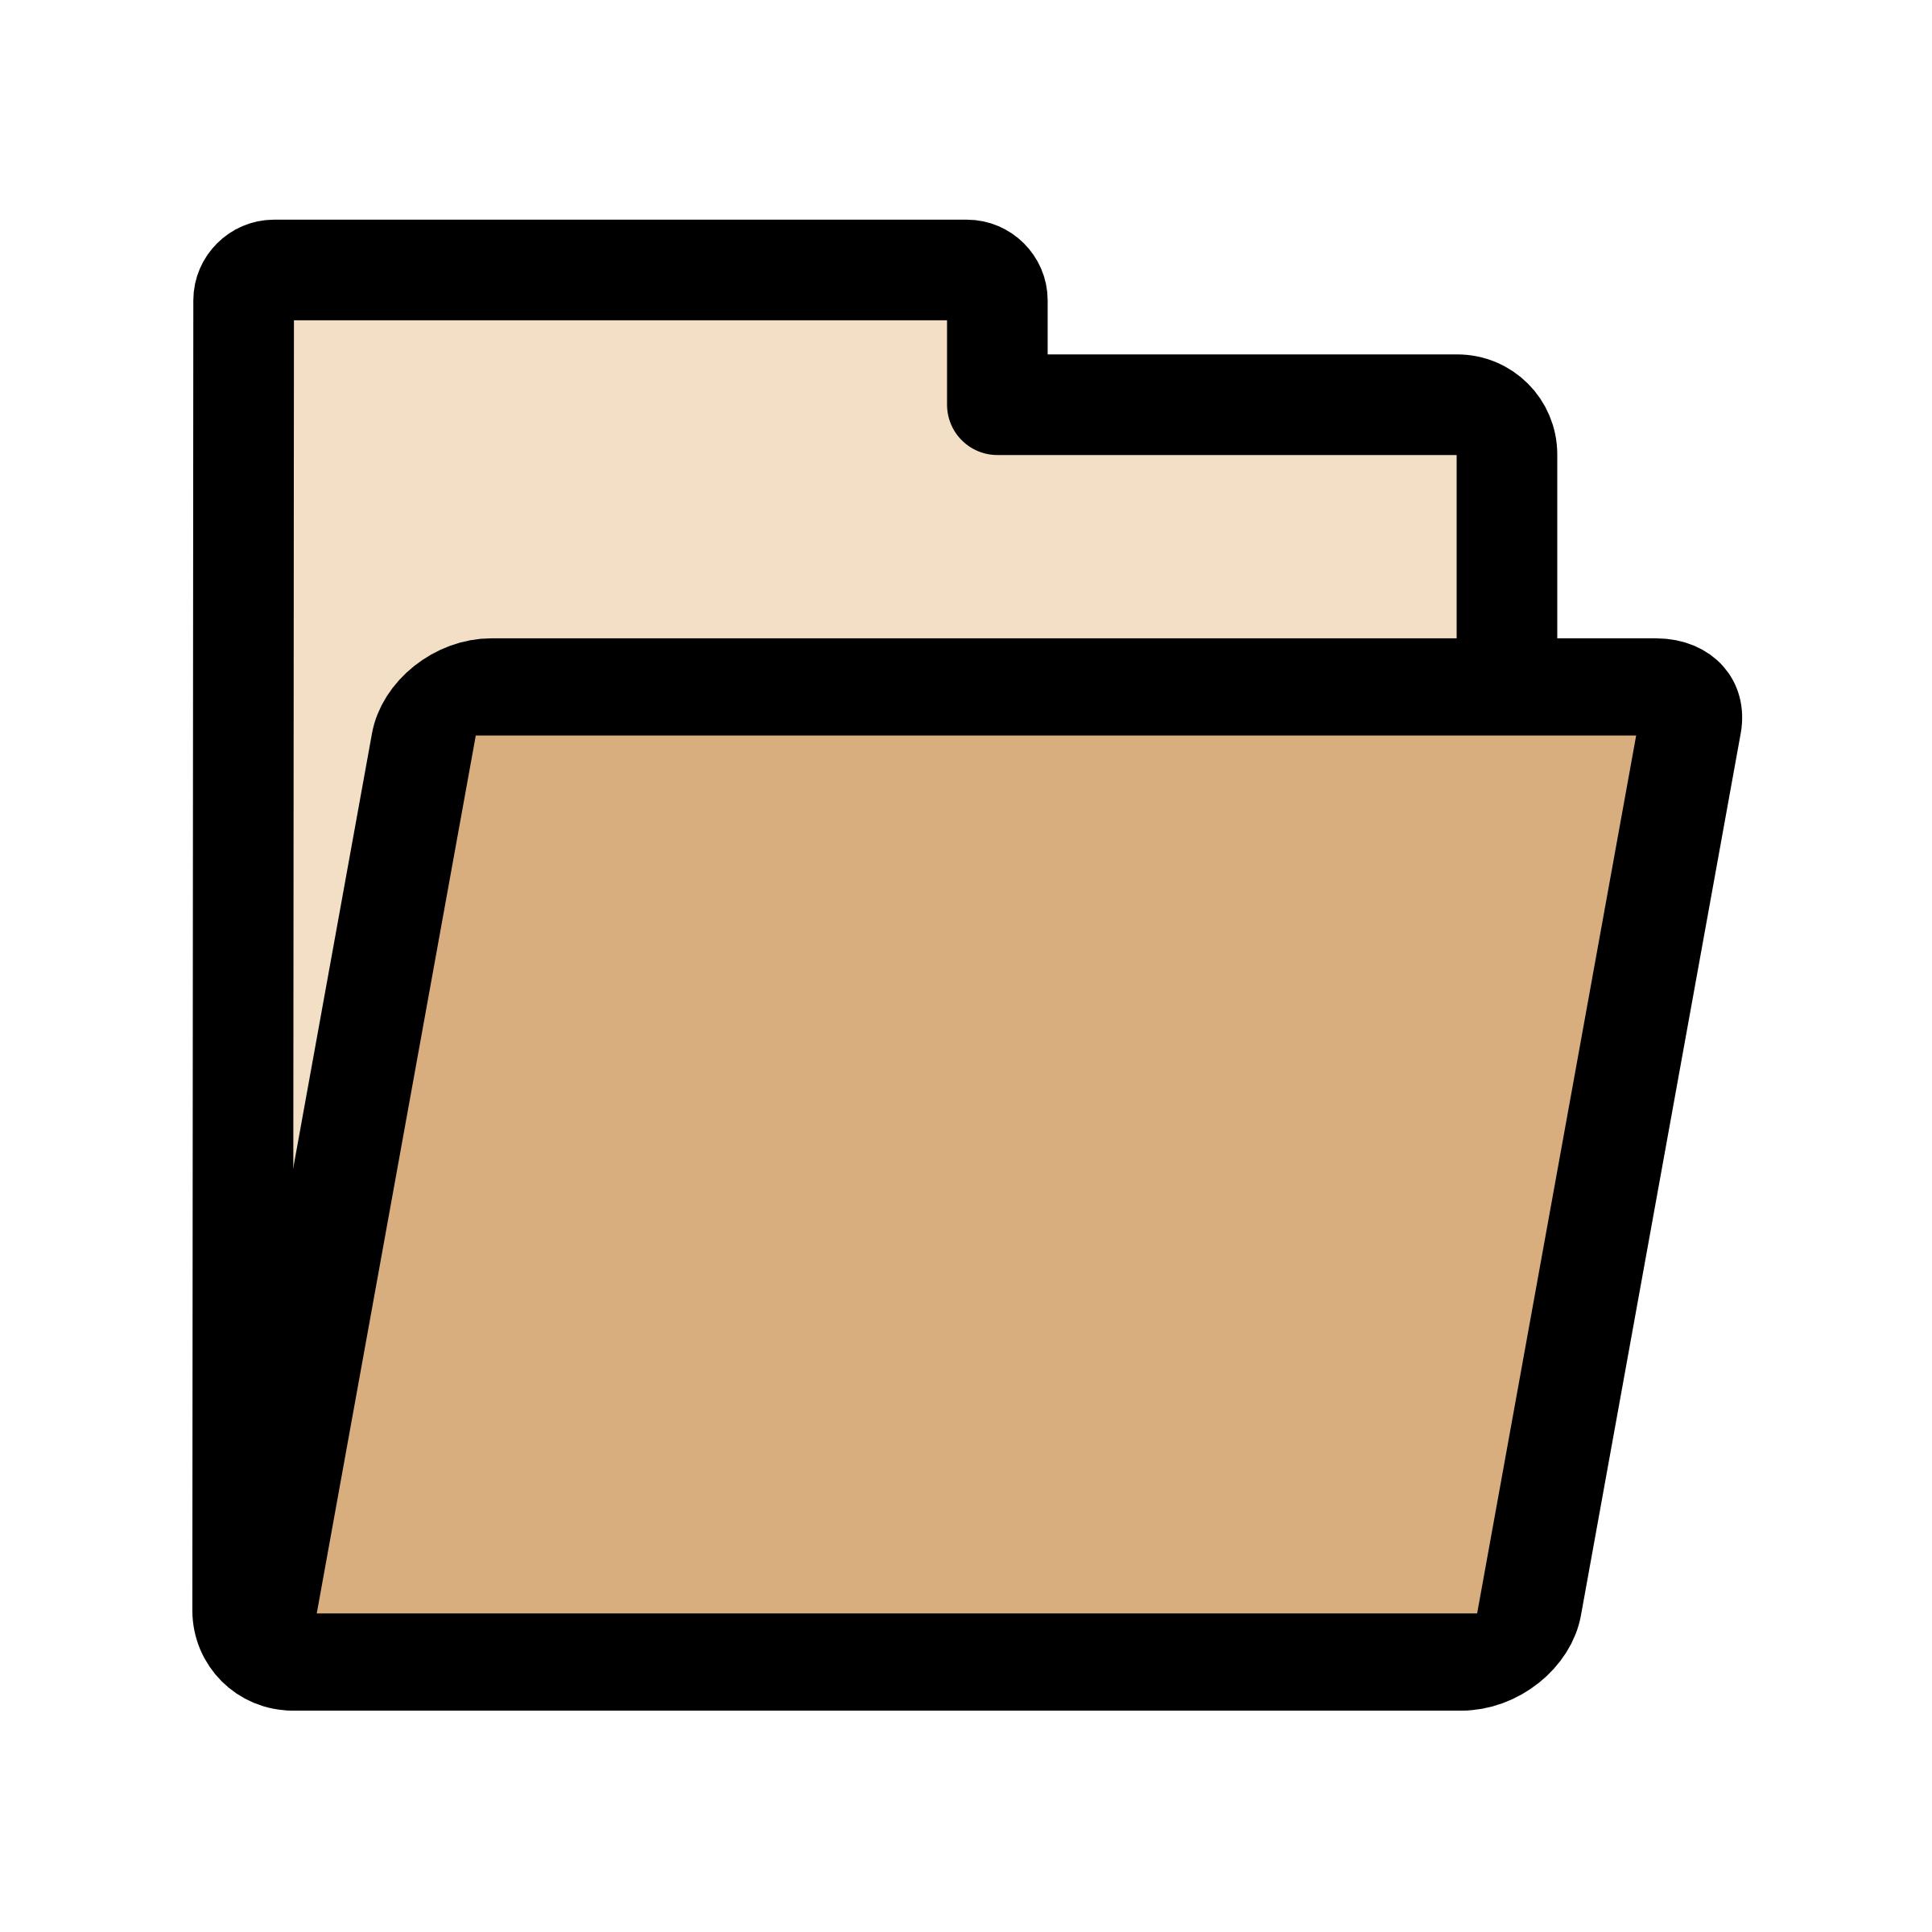 primary file icons